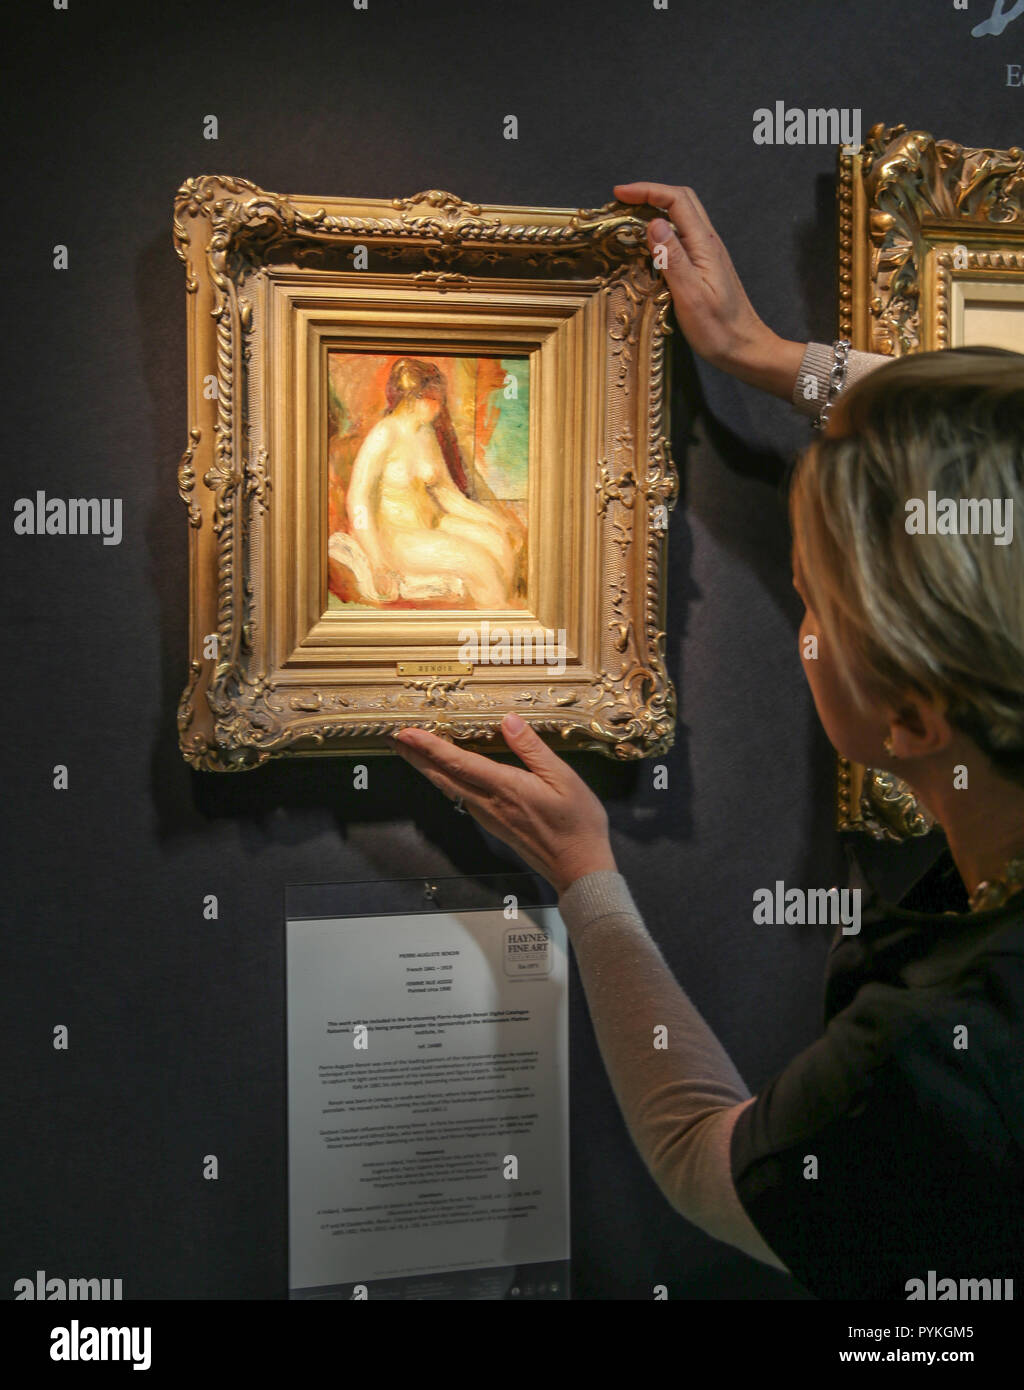 London UK 29 October 2018 Now in its 28th year the Winter and Art Fair will throw open its doors today to the thousands of collectors, connoisseurs, interior designers and canny ,early, Christmas shoppers,Seventy  leading UK dealers and over 20,000 objects of outstanding quality,will be on offer, Pierre Auguste Renoir 'Femme Nue Assise' POA@Paul Quezada-Neiman/Alamy Live News Stock Photo